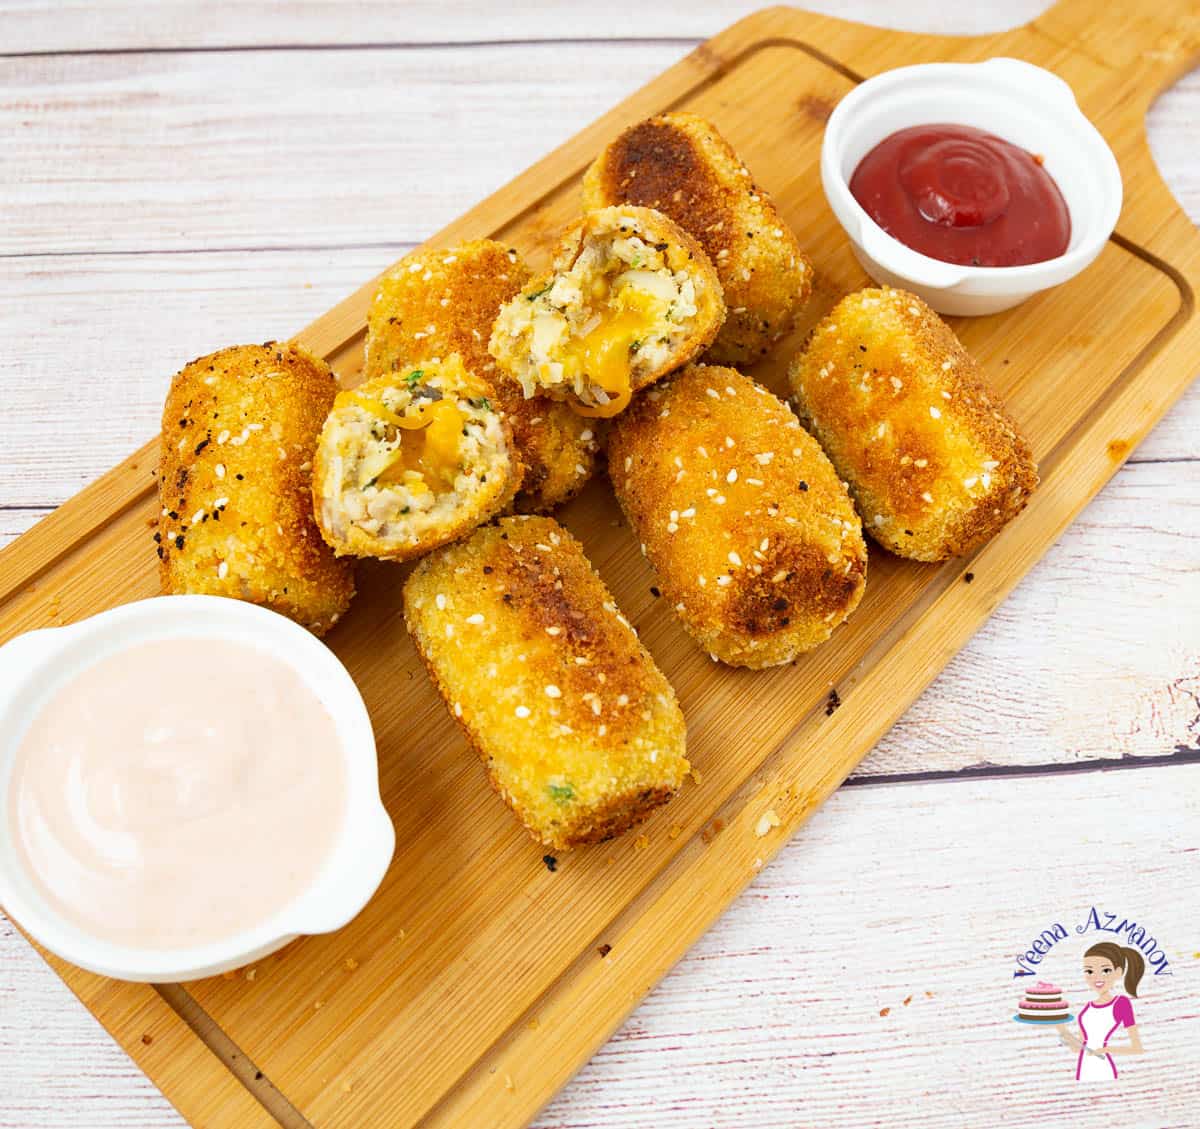 Chicken croquettes with dipping sauces on a wooden board.